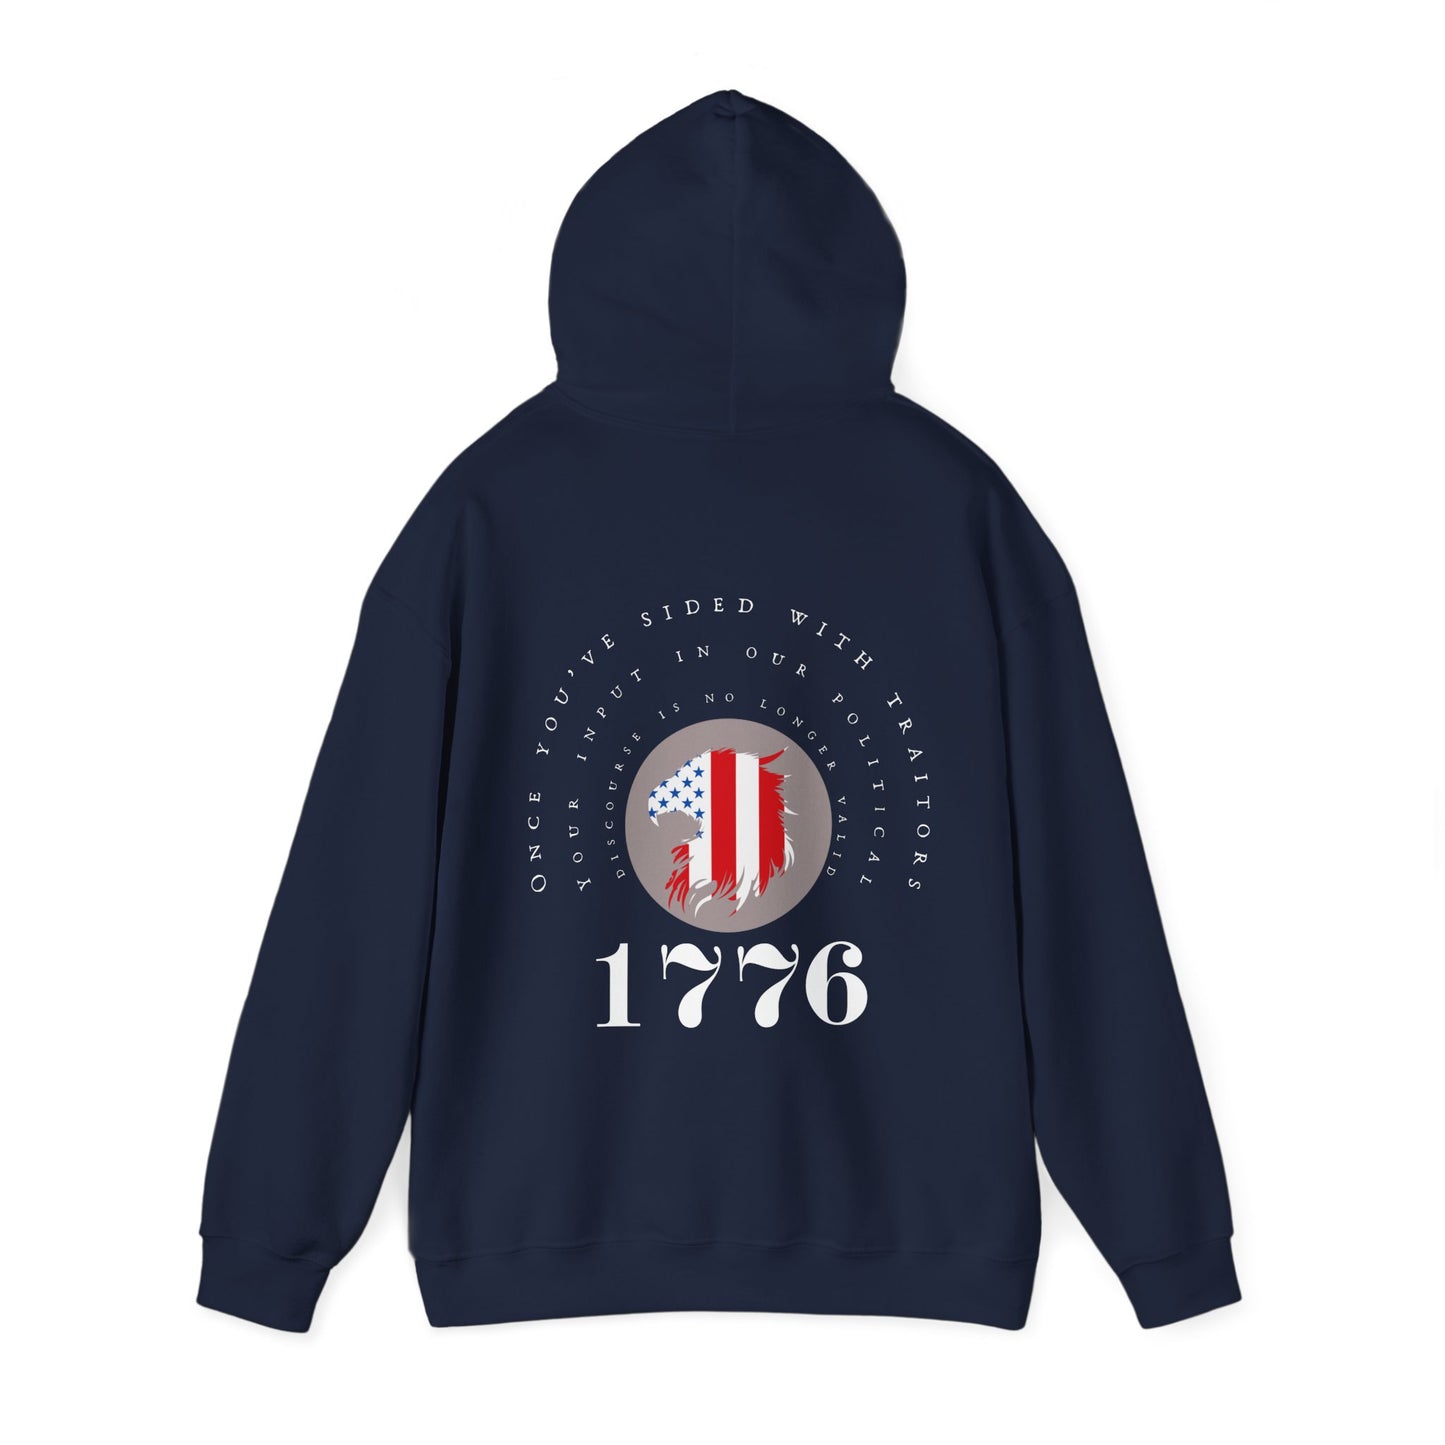 Once You've Sided With Traitors - Eagle Hoodie